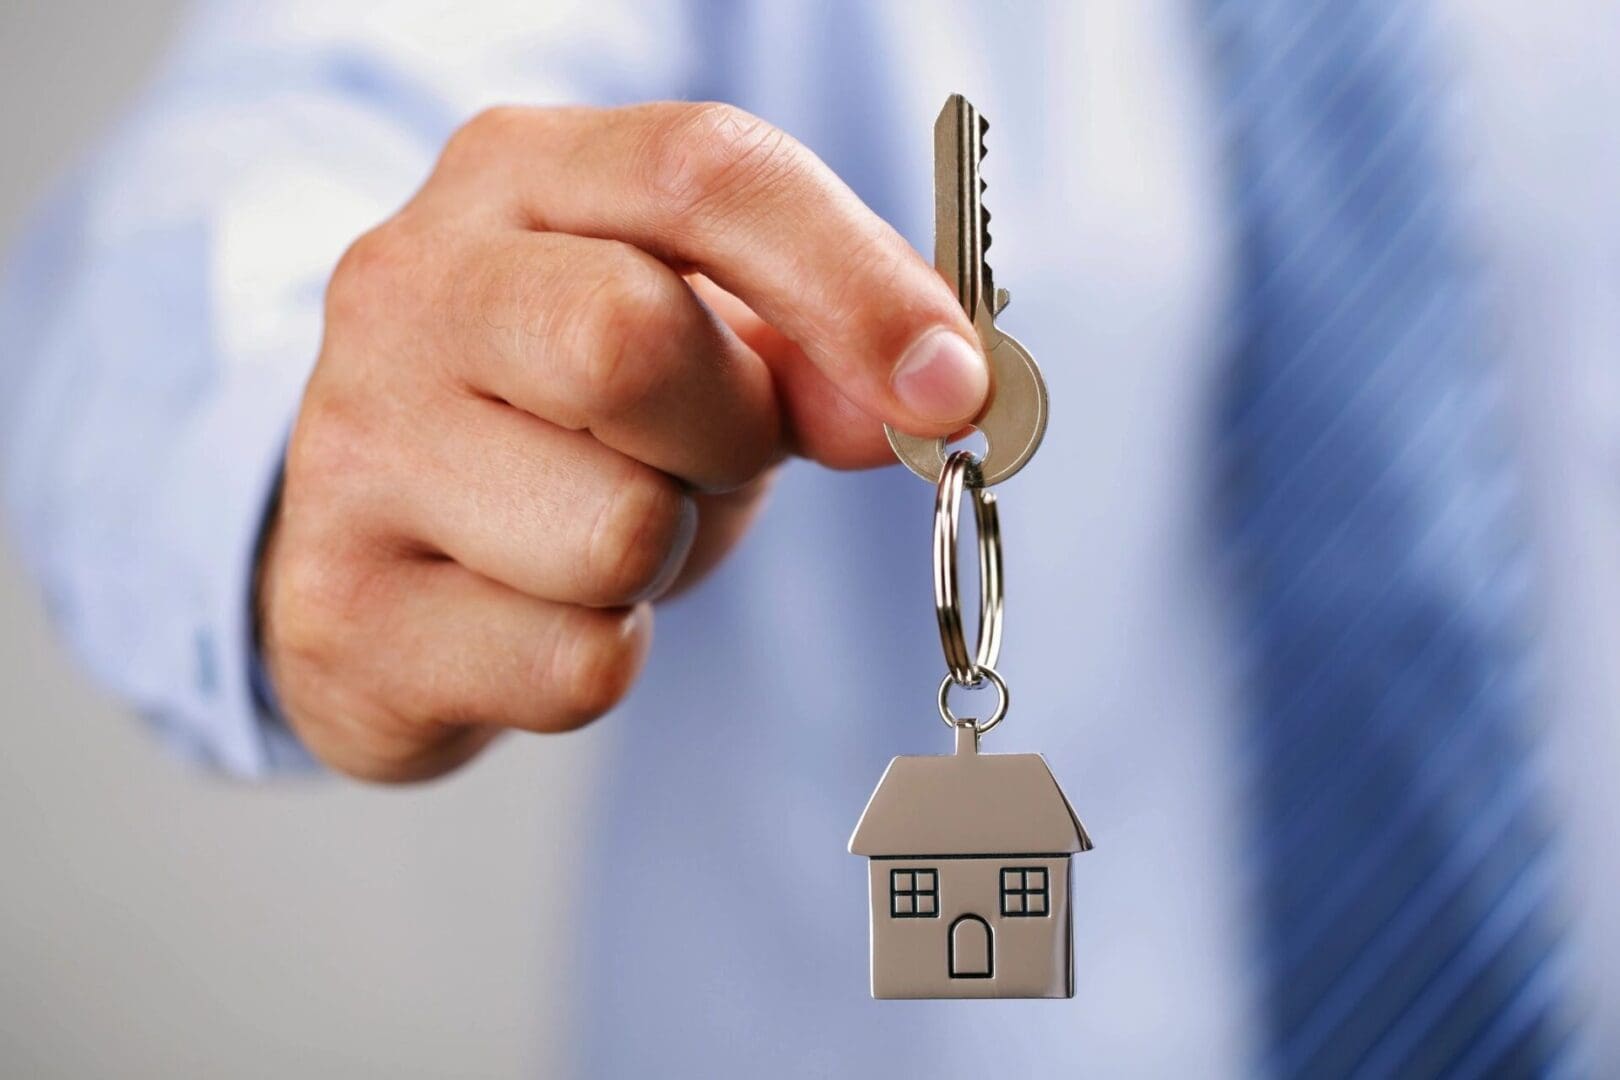 Man in a business suit holding a keychain with a house-shaped key fob.